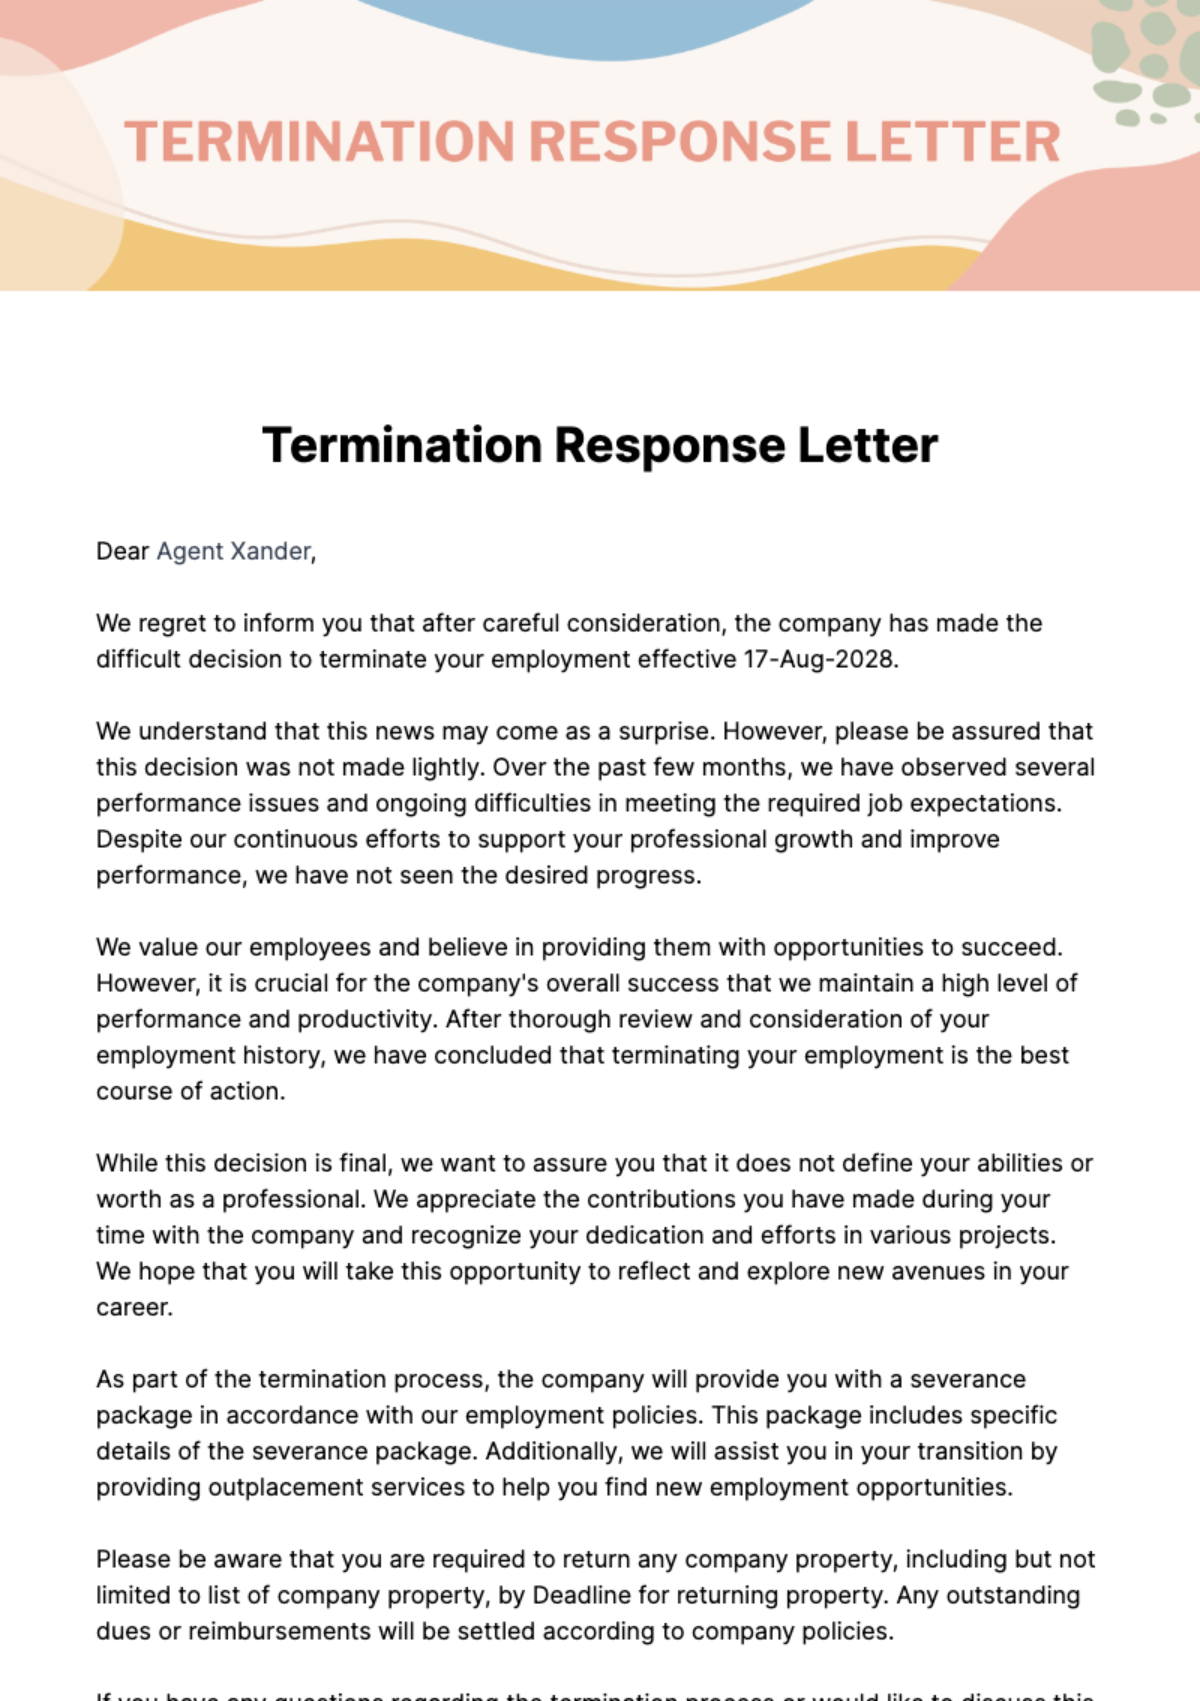 Termination Response Letter Template